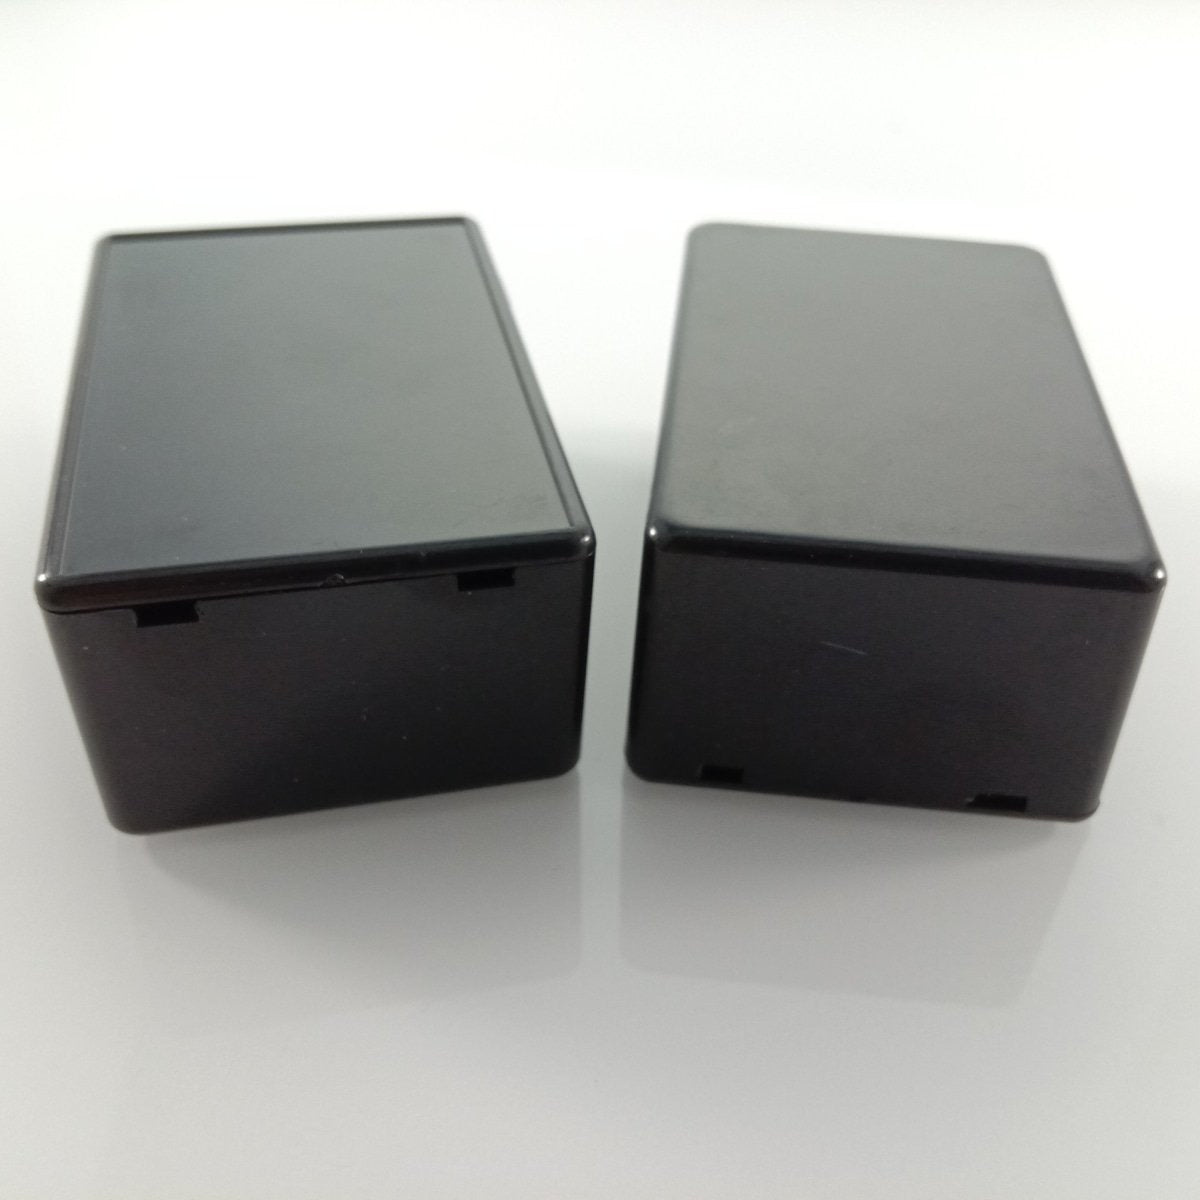 Take Photos Of White Boxes 4Pcs Electronic Project Case Enclosure Junction Box 70X45X29Mm Waterproof